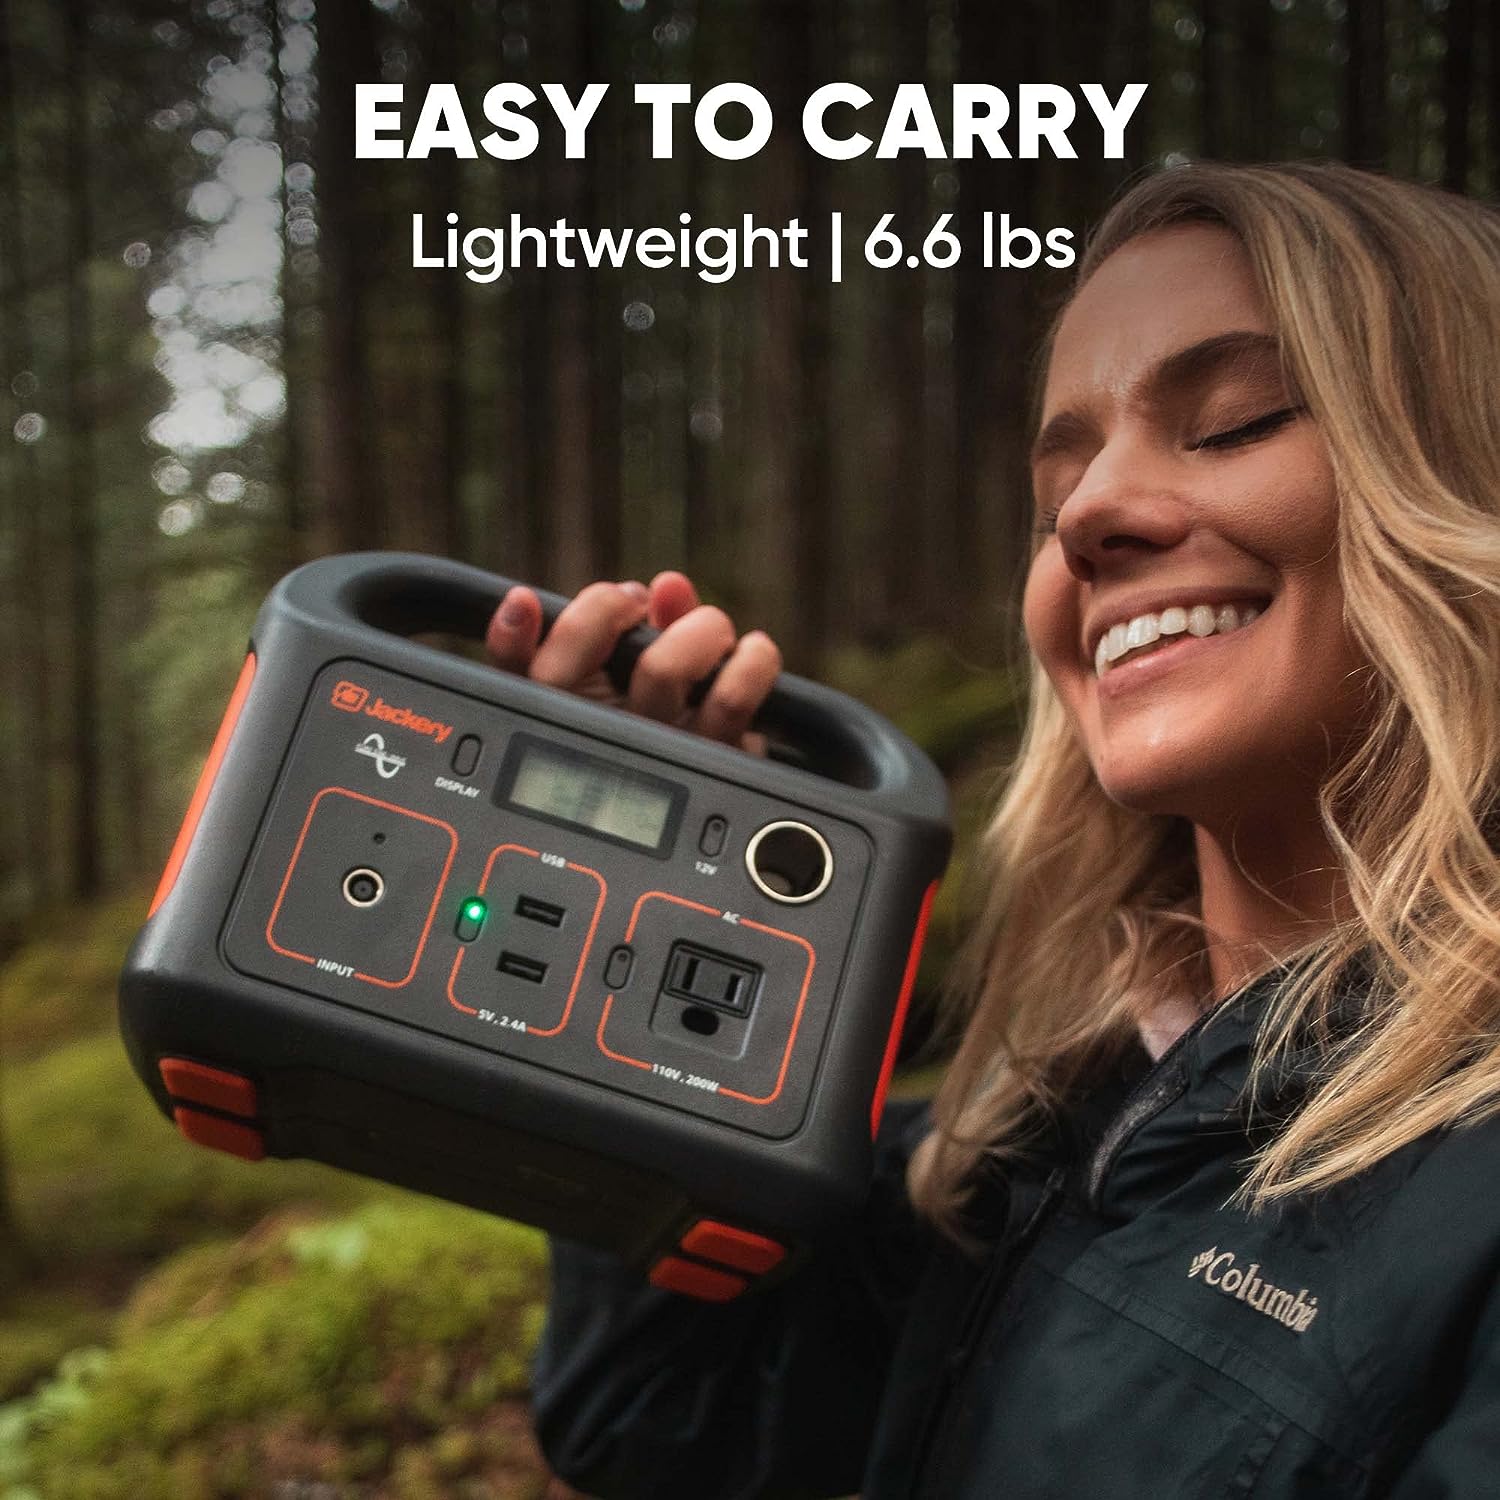 Jackery Portable Power Station Explorer 240, 240Wh Backup Lithium Battery, 110V/200W Pure Sine Wave AC Outlet, Solar Generator for Outdoors Camping Travel Hunting Emergency (Solar Panel Optional) - image 4 of 5